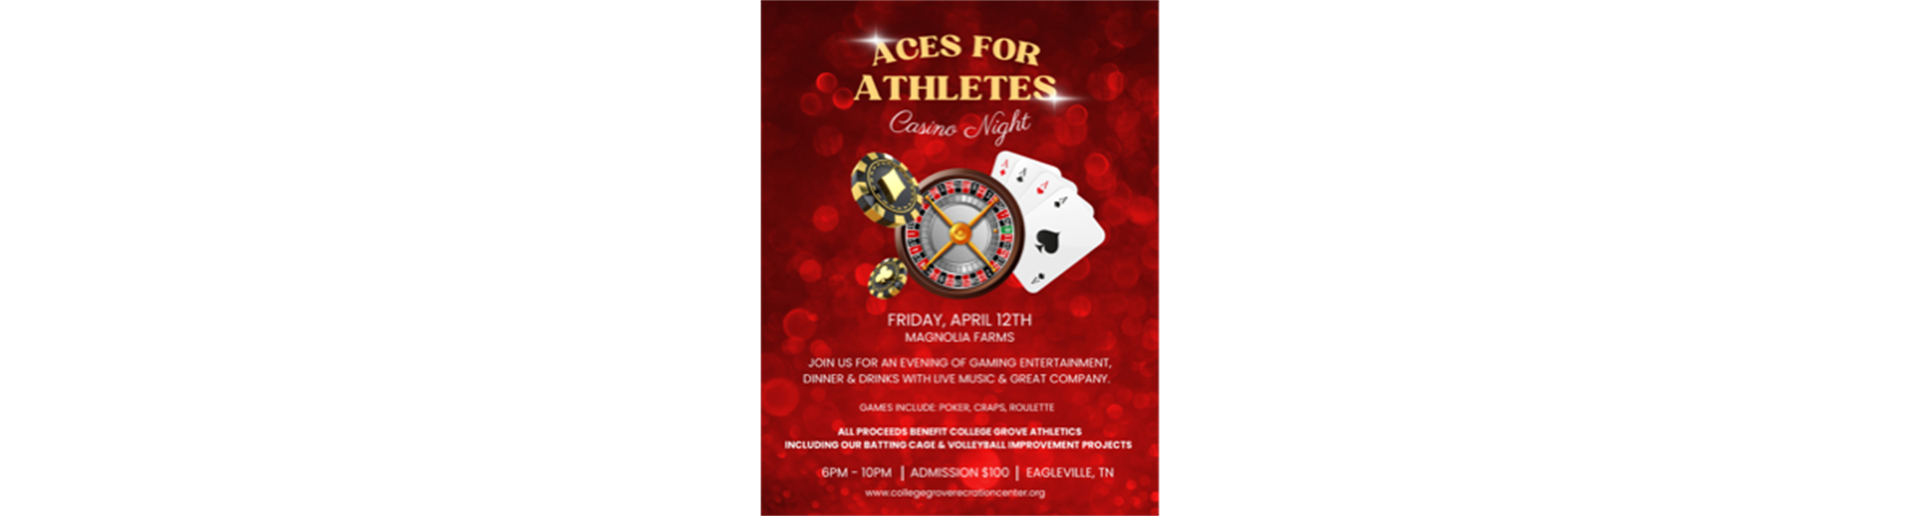 Aces for Athletes